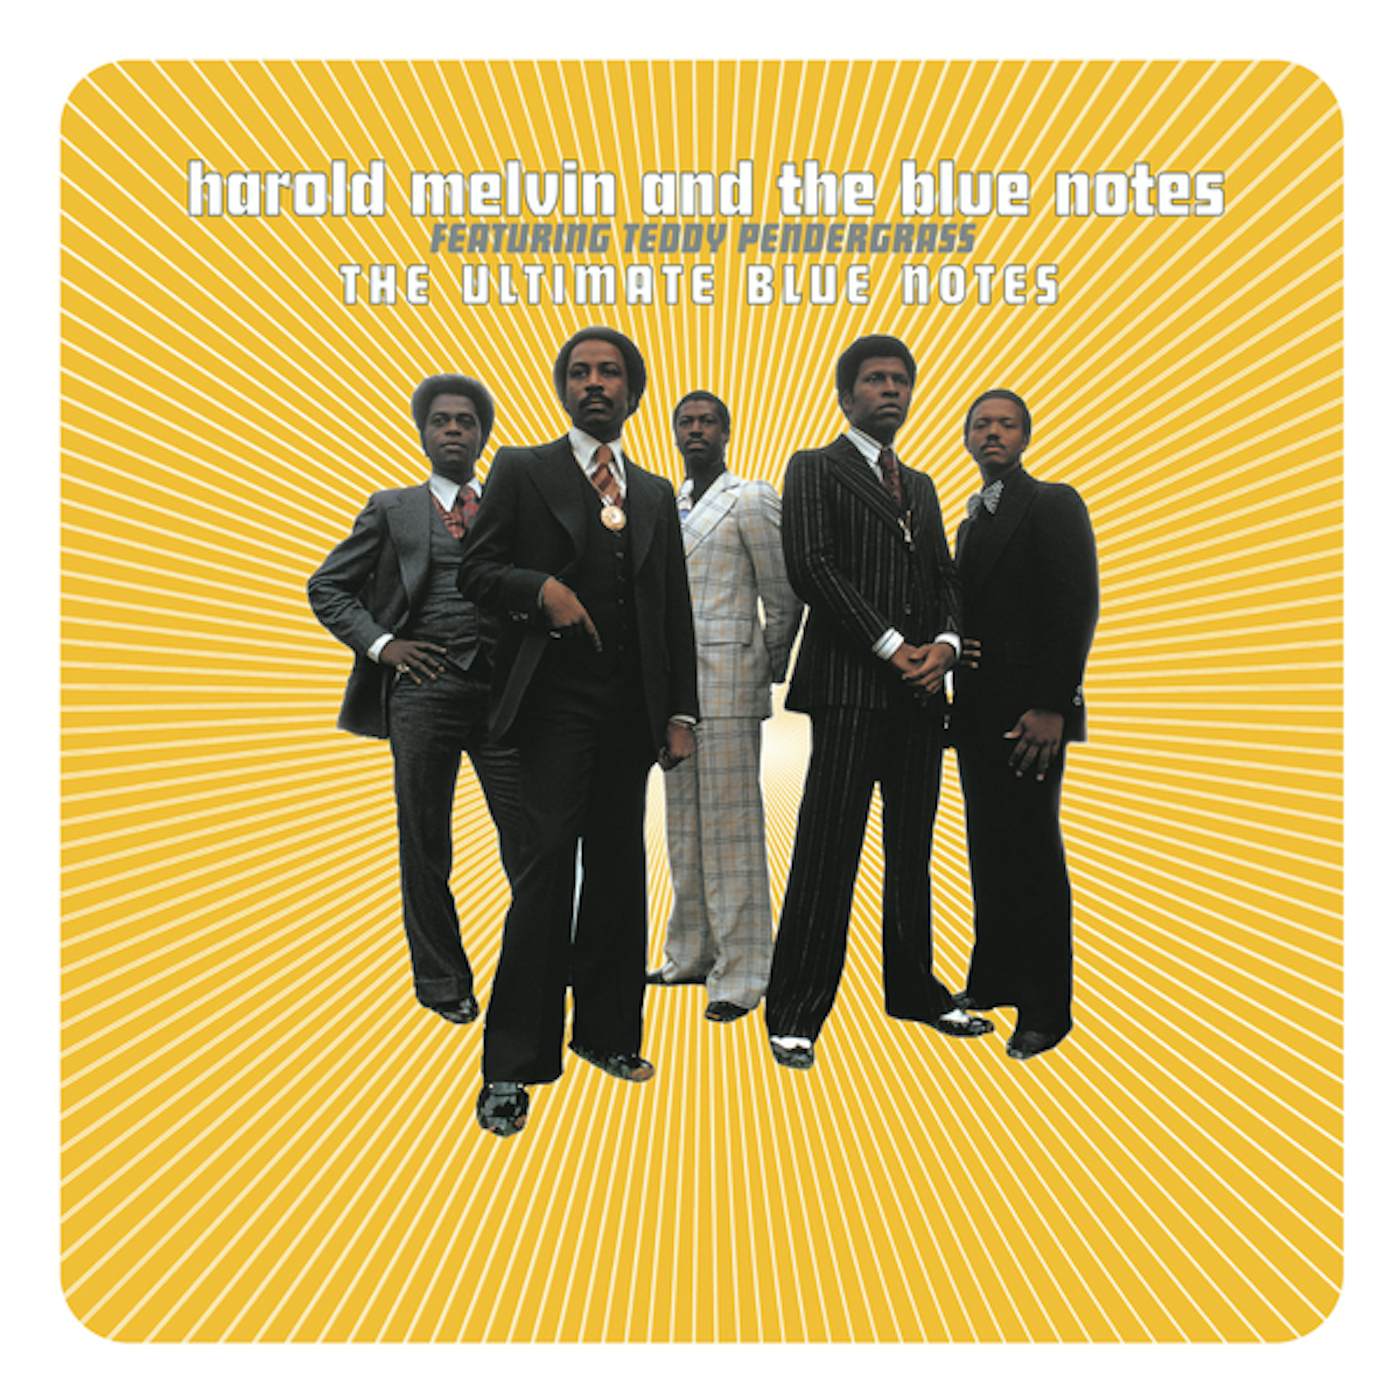 Harold Melvin & The Blue Notes ULTIMATE BLUE NOTES CD